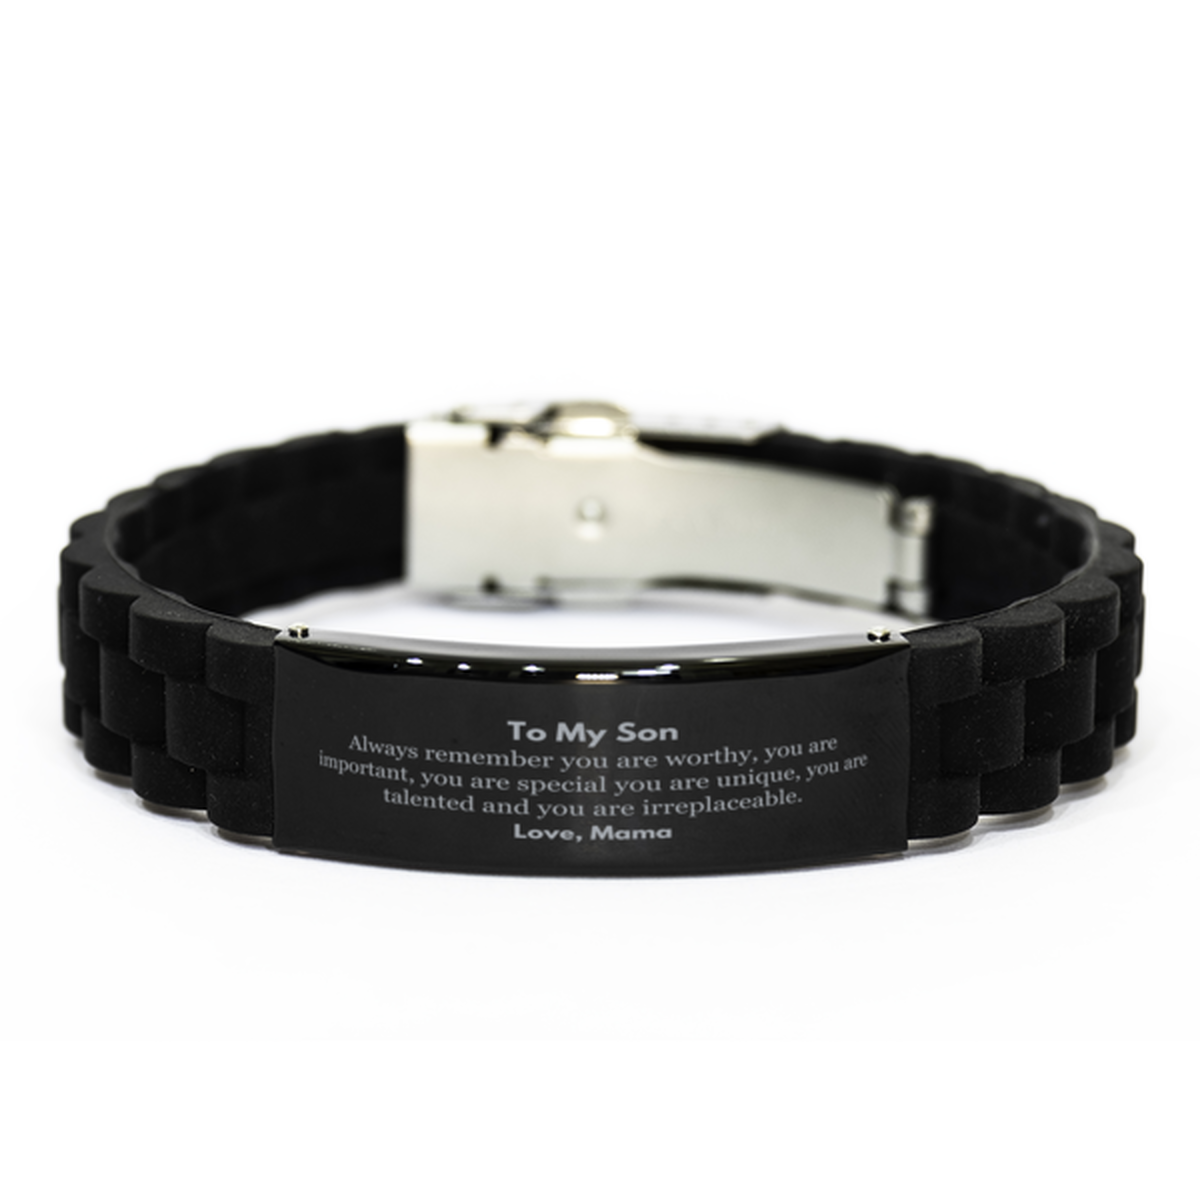 Son Birthday Gifts from Mama, Inspirational Black Glidelock Clasp Bracelet for Son Christmas Graduation Gifts for Son Always remember you are worthy, you are important. Love, Mama